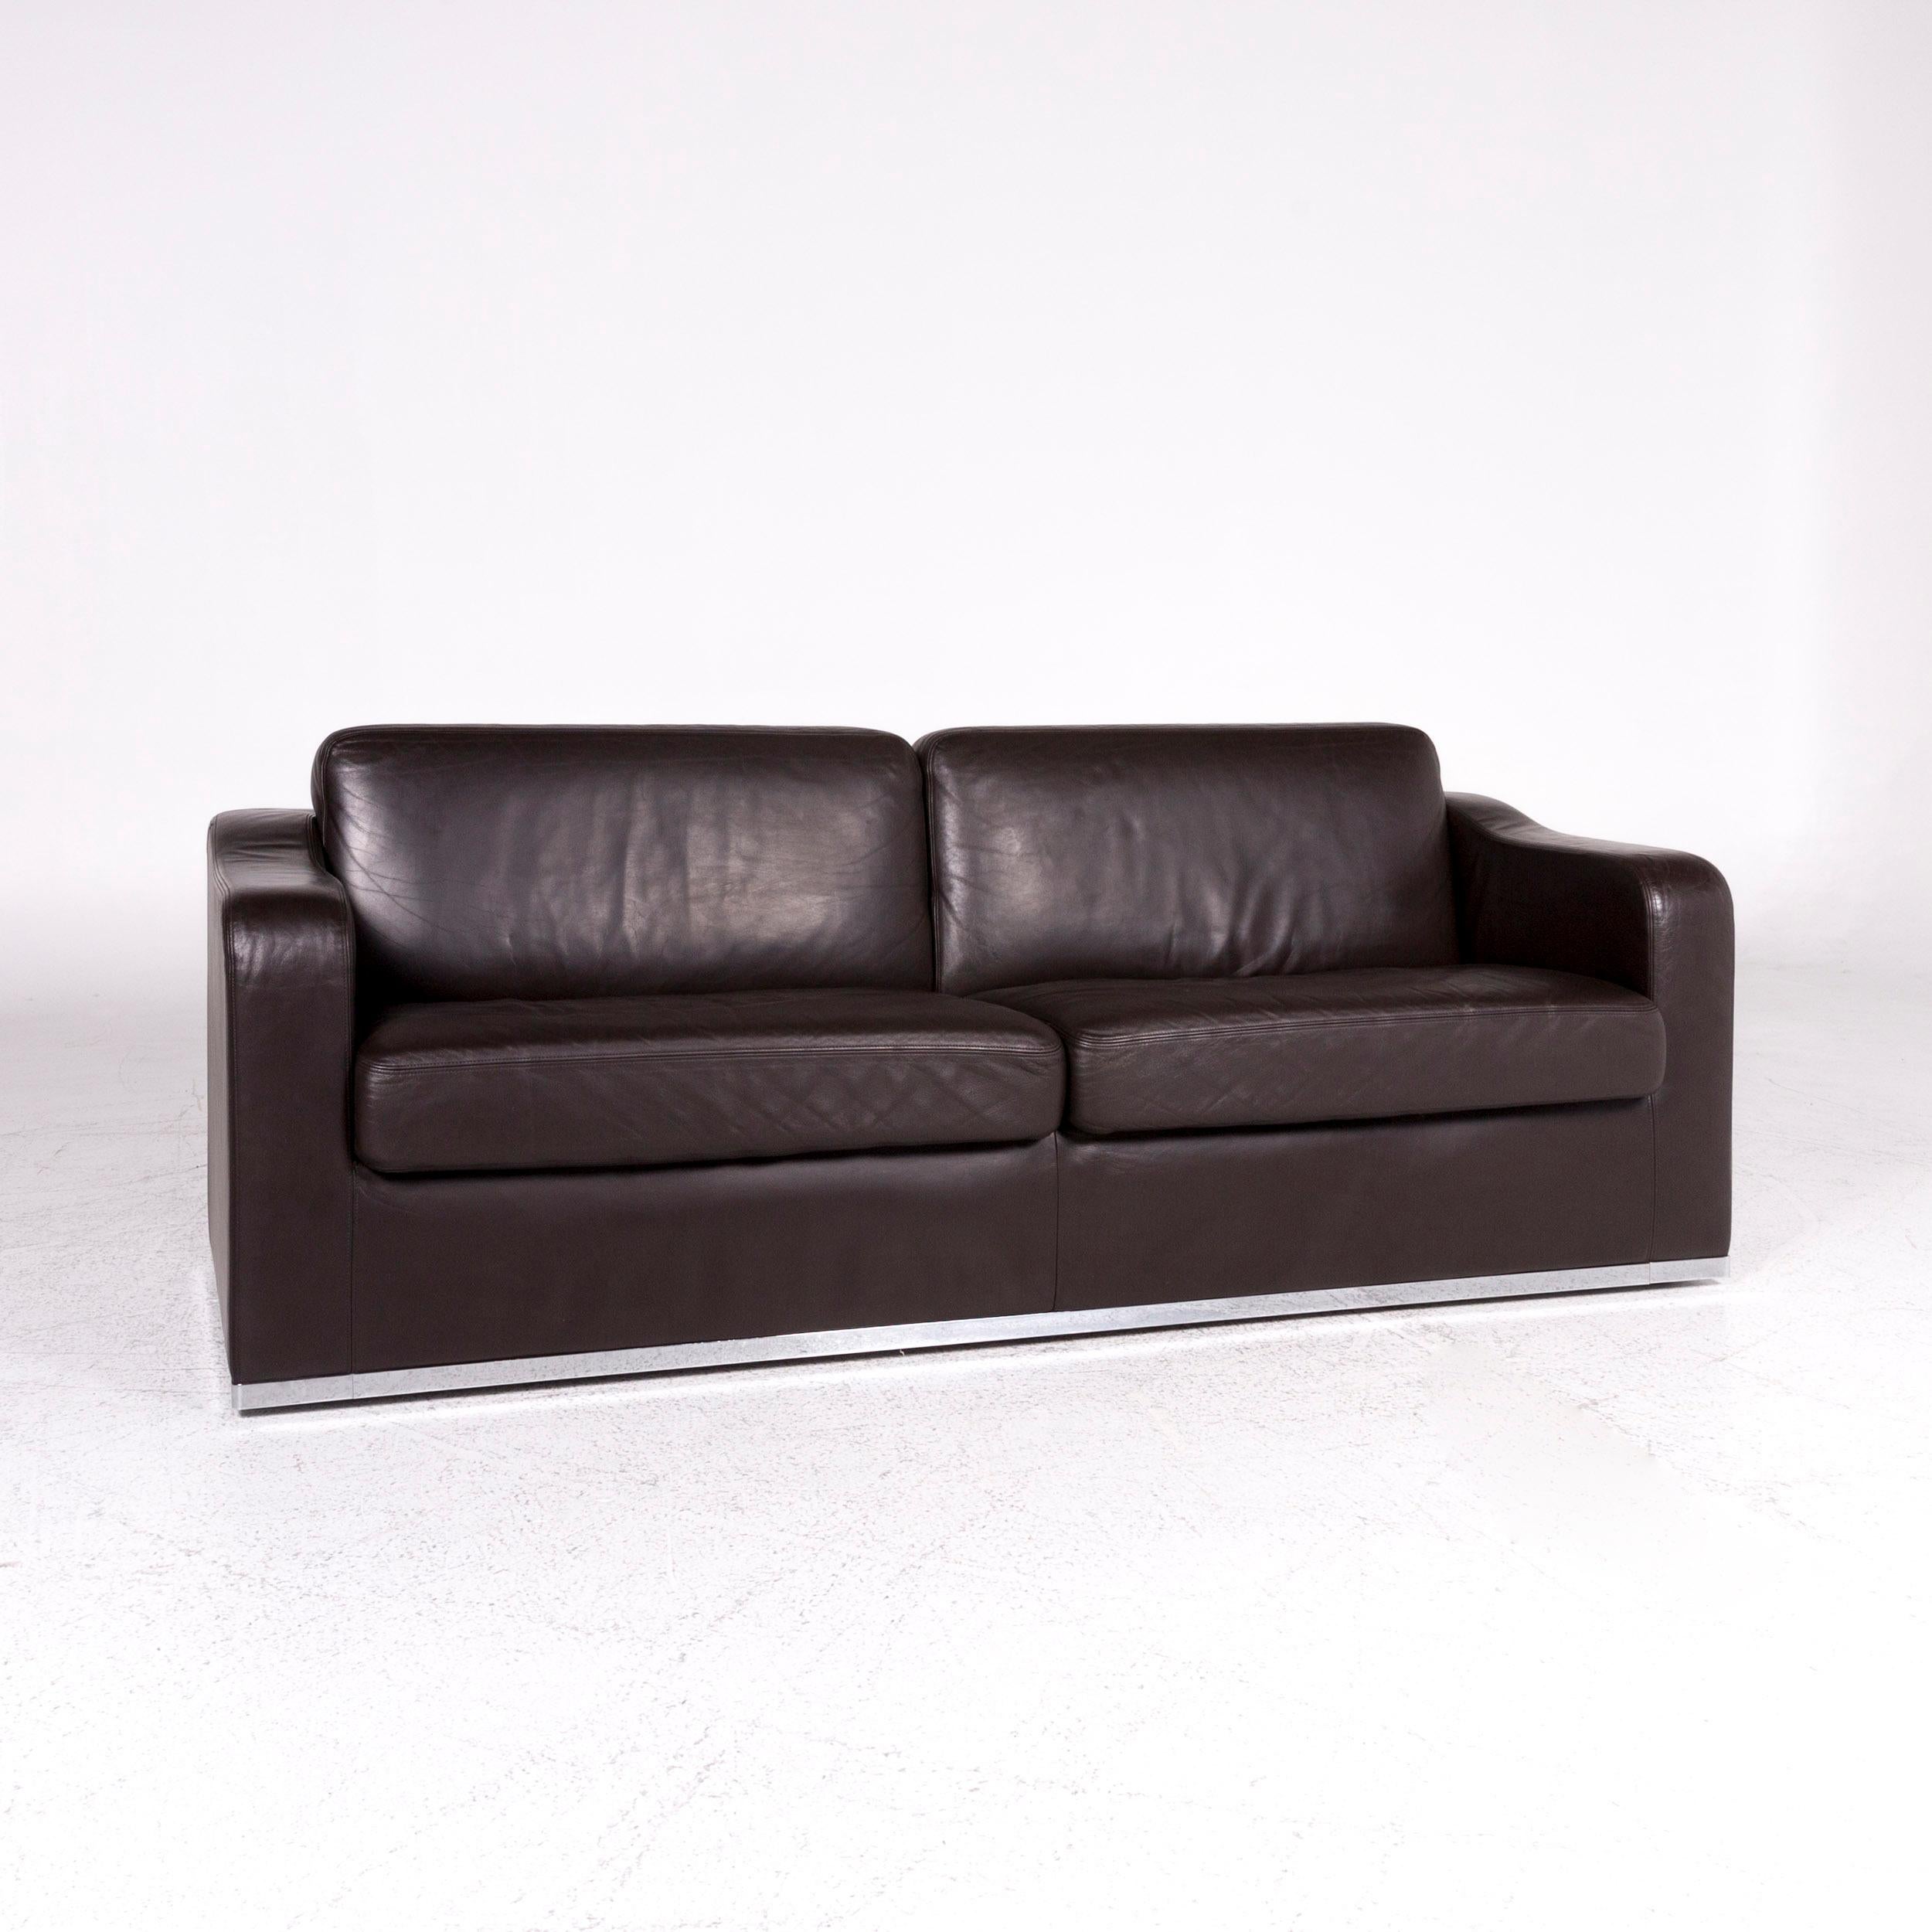 Swiss De Sede Ds 6 Leather Sofa Brown Two-Seat Couch For Sale